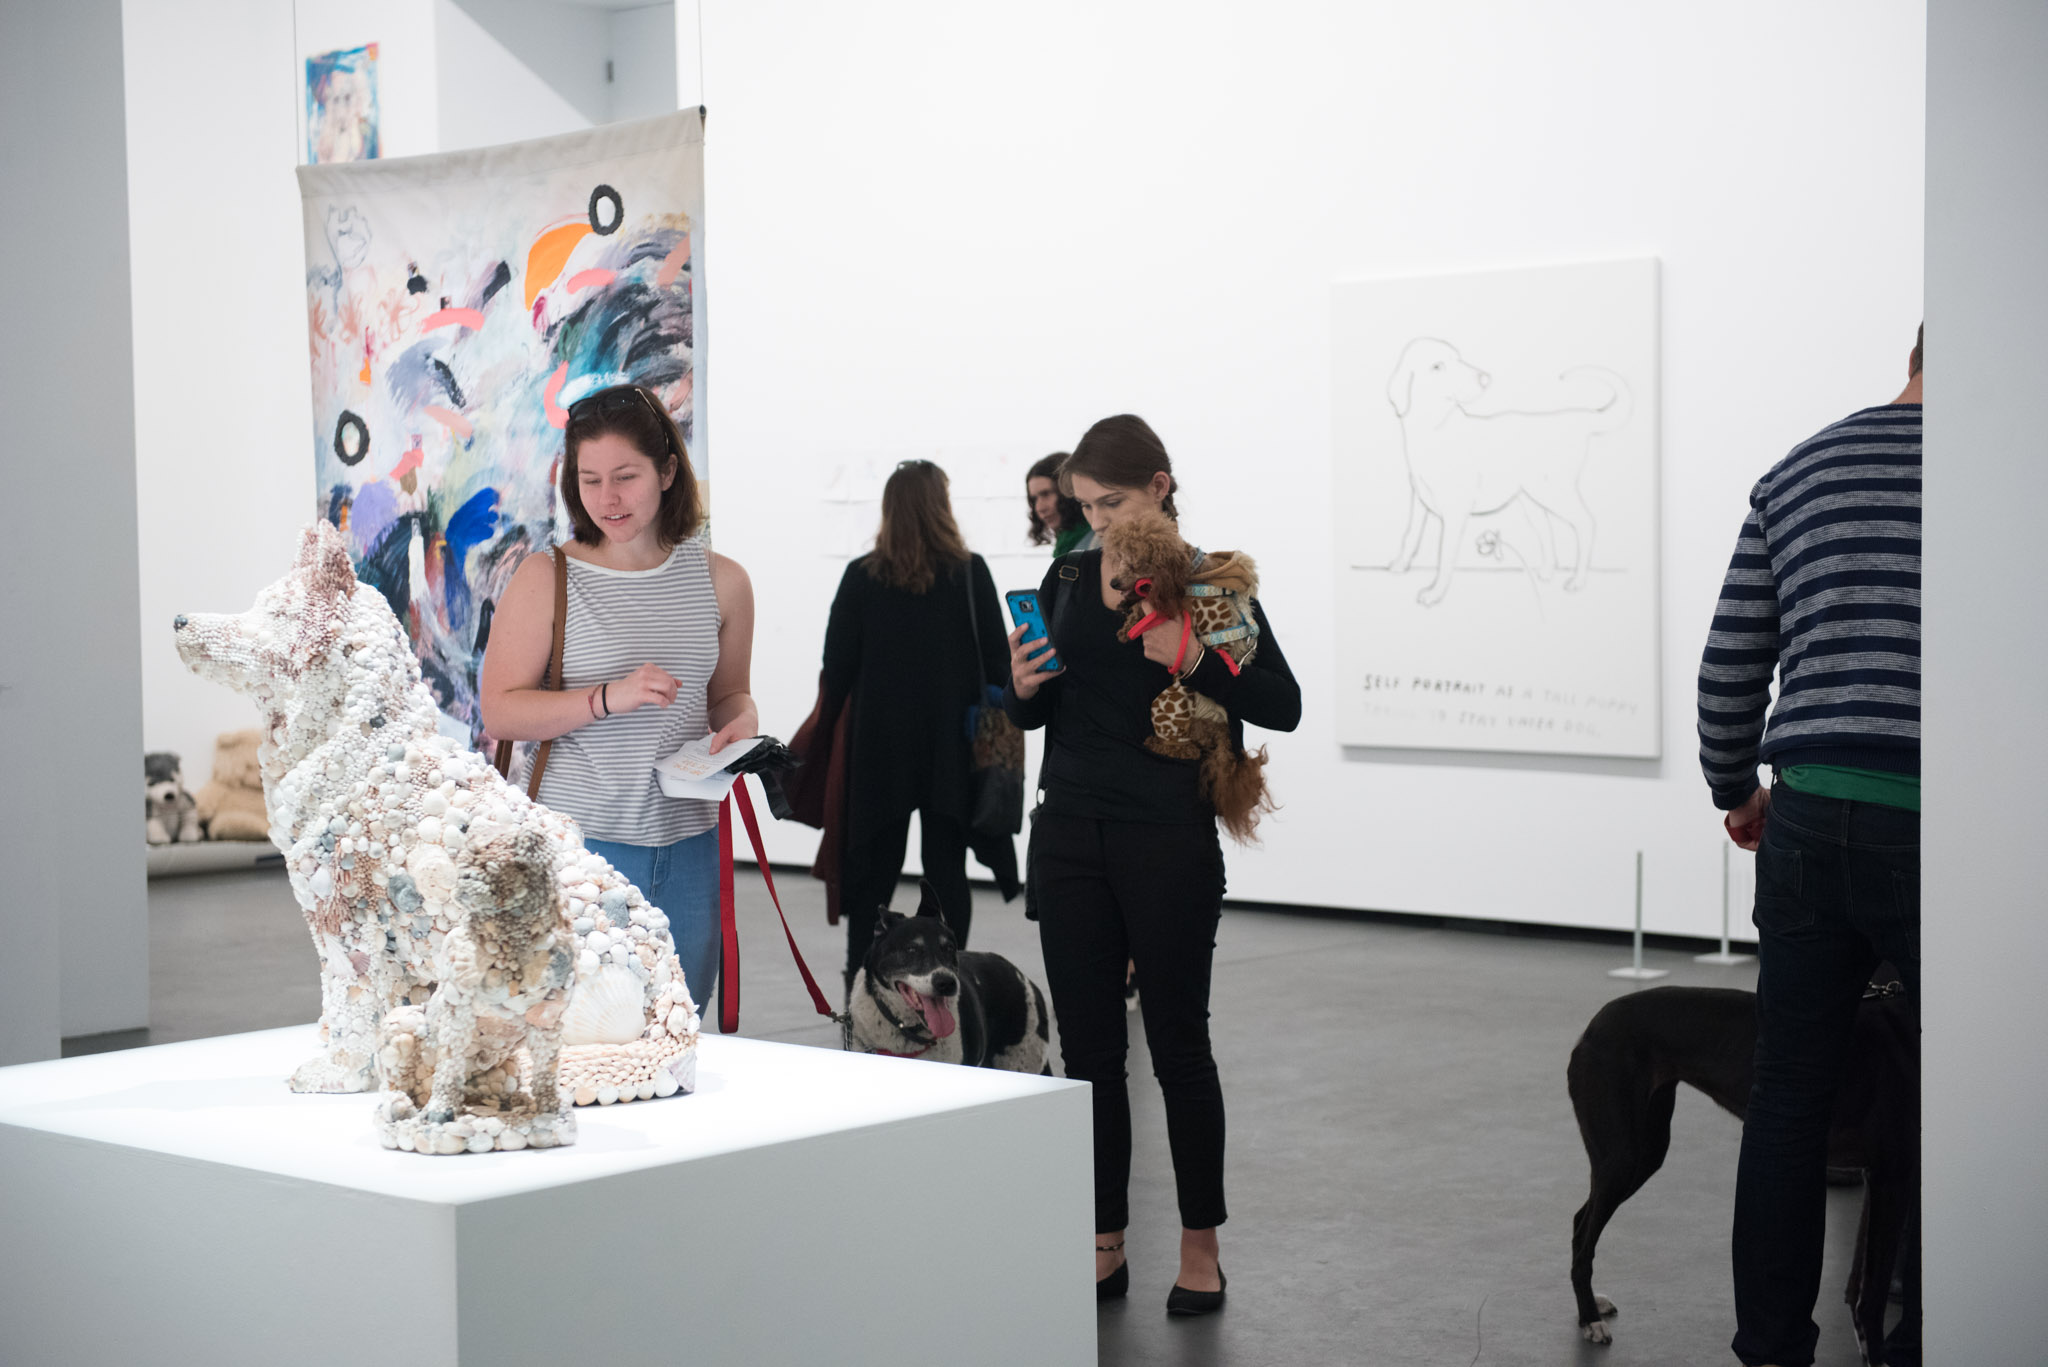  Visitors at the exhibition launch,  Every Dog Will Have its Day,  2017, Casula Powerhouse Arts Centre, Sydney. Photo: Andrea Todic 